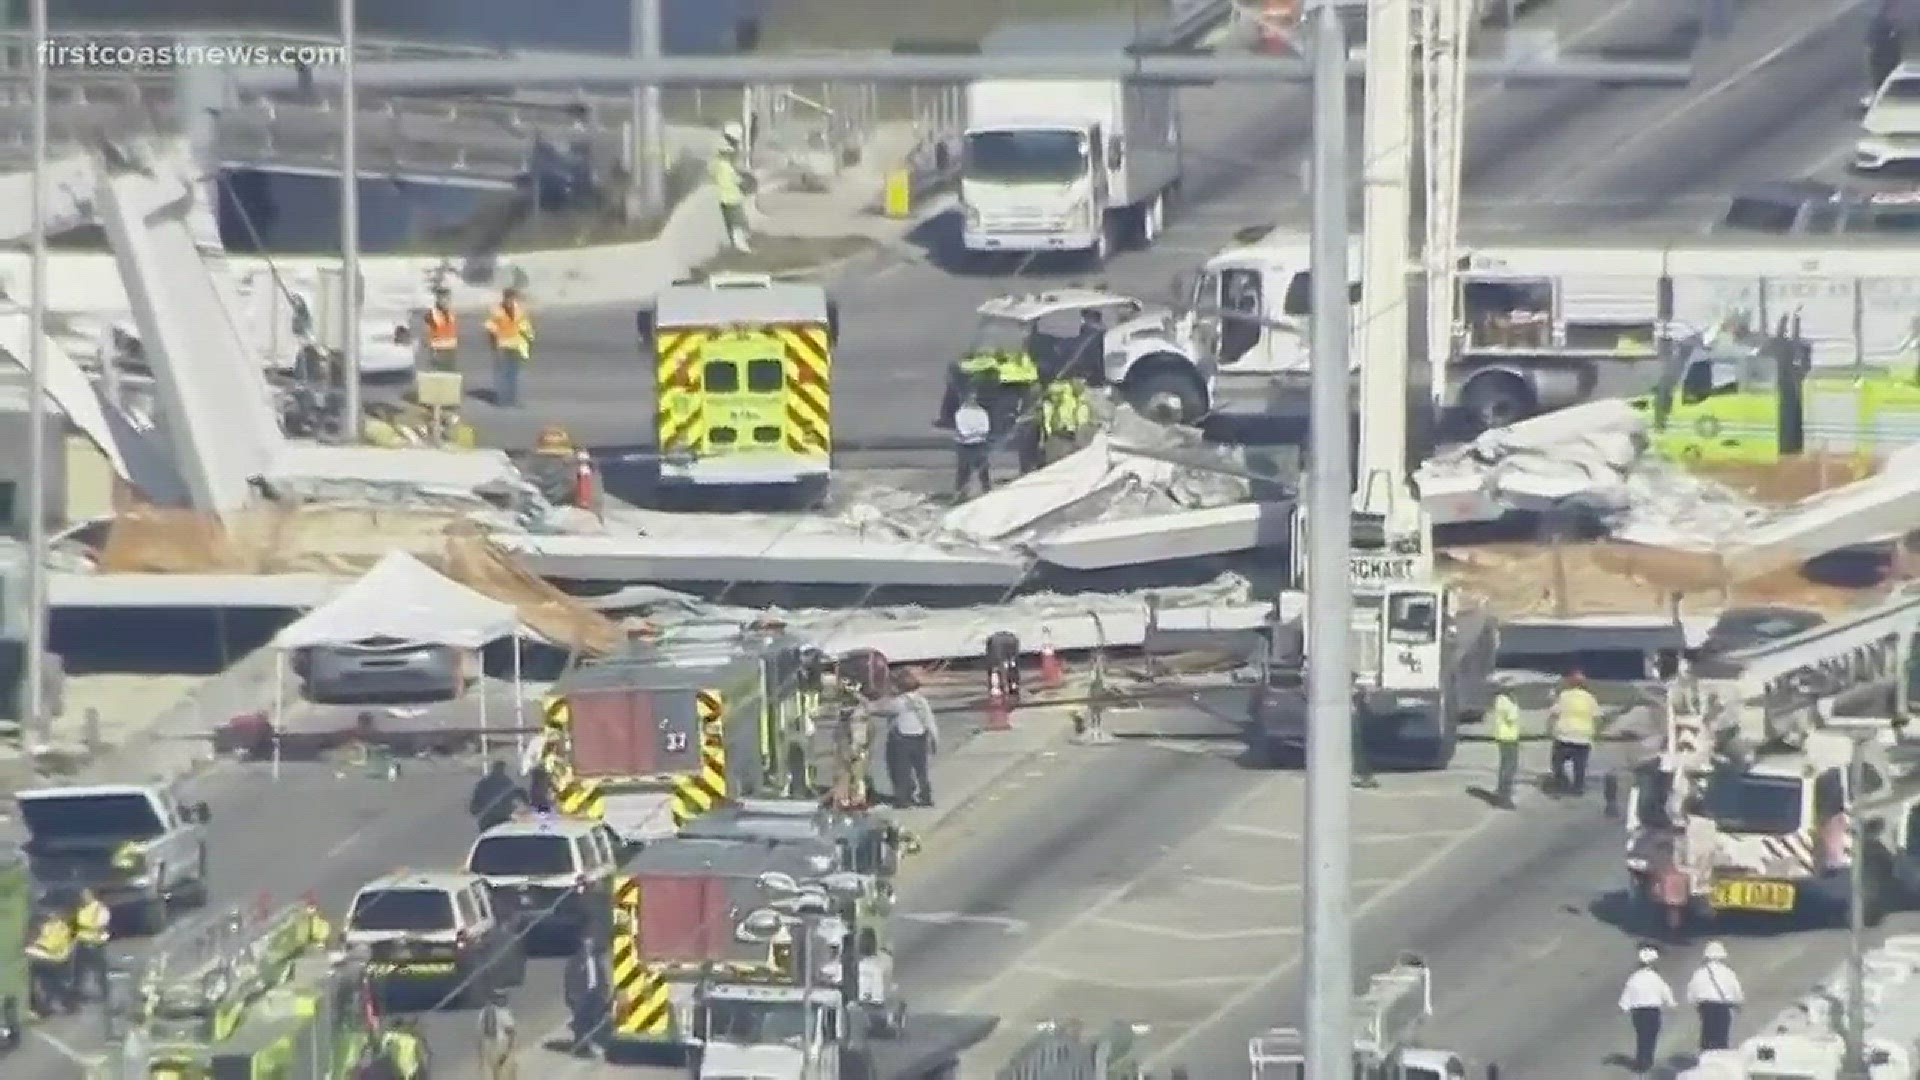 Eight cars were trapped under the bridge at Florida International University and eight victims were transported to hospitals, according to Miami officials.